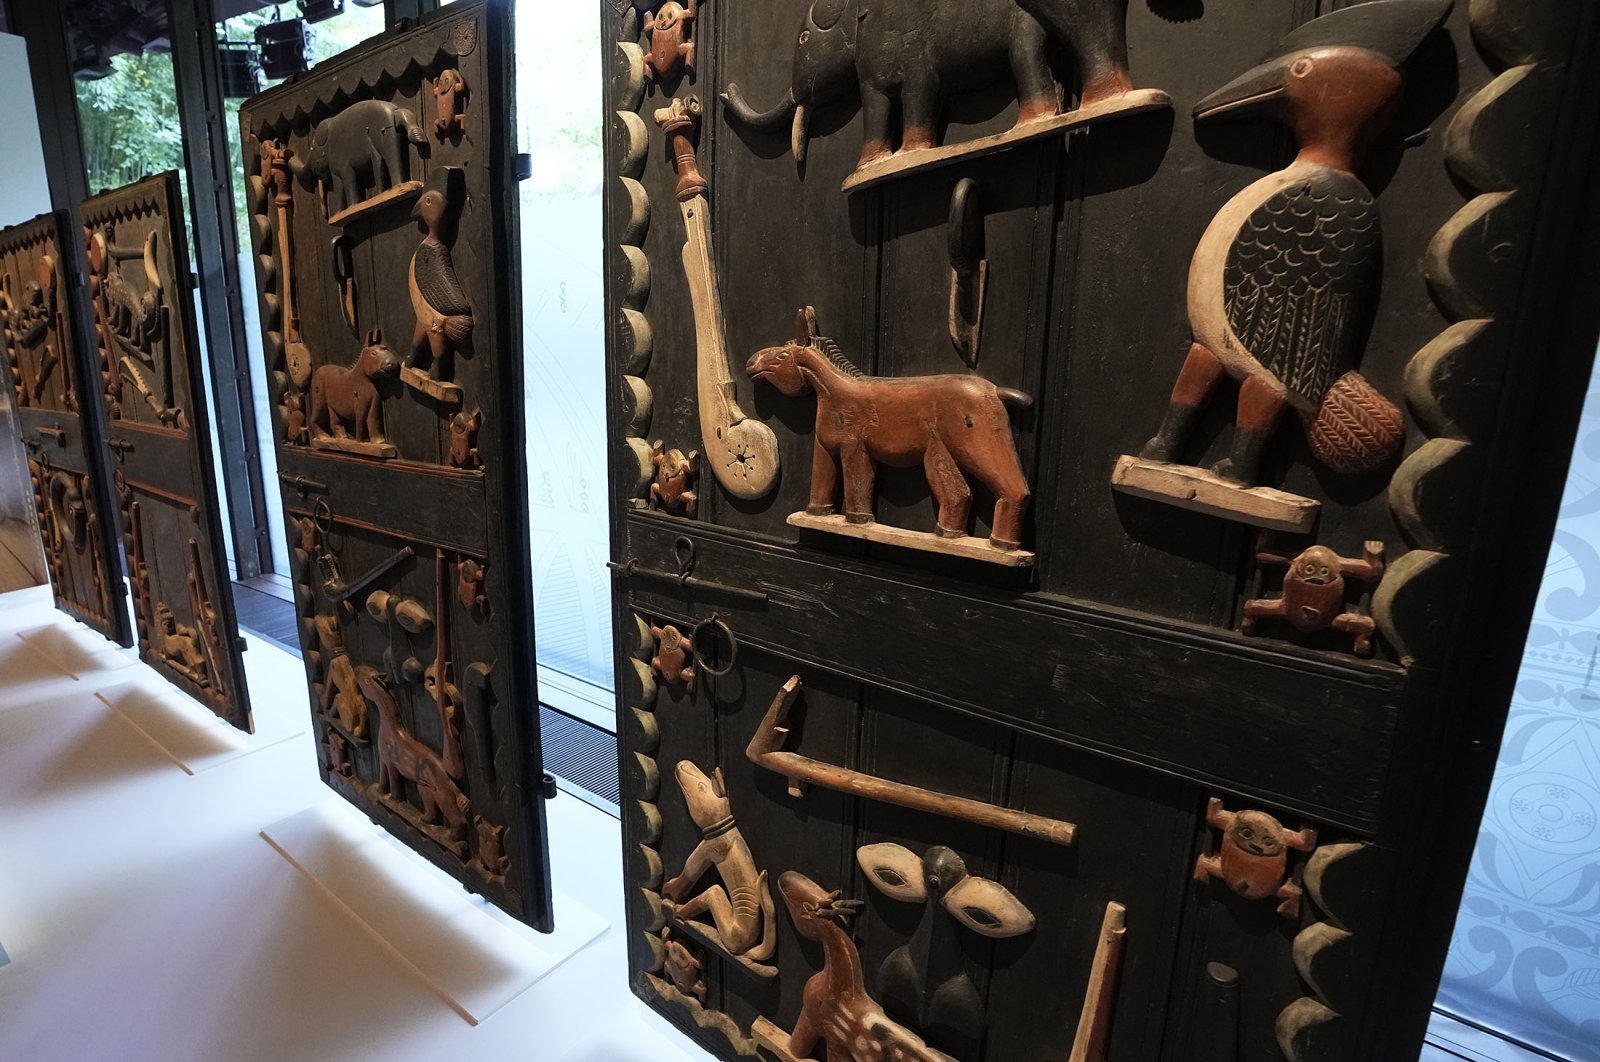 The doors of King Glele's palace, from Benin 19th century, pictured at the Quai Branly – Jacques Chirac museum, in Paris, France, Oct. 25, 2021. (AP Photo)